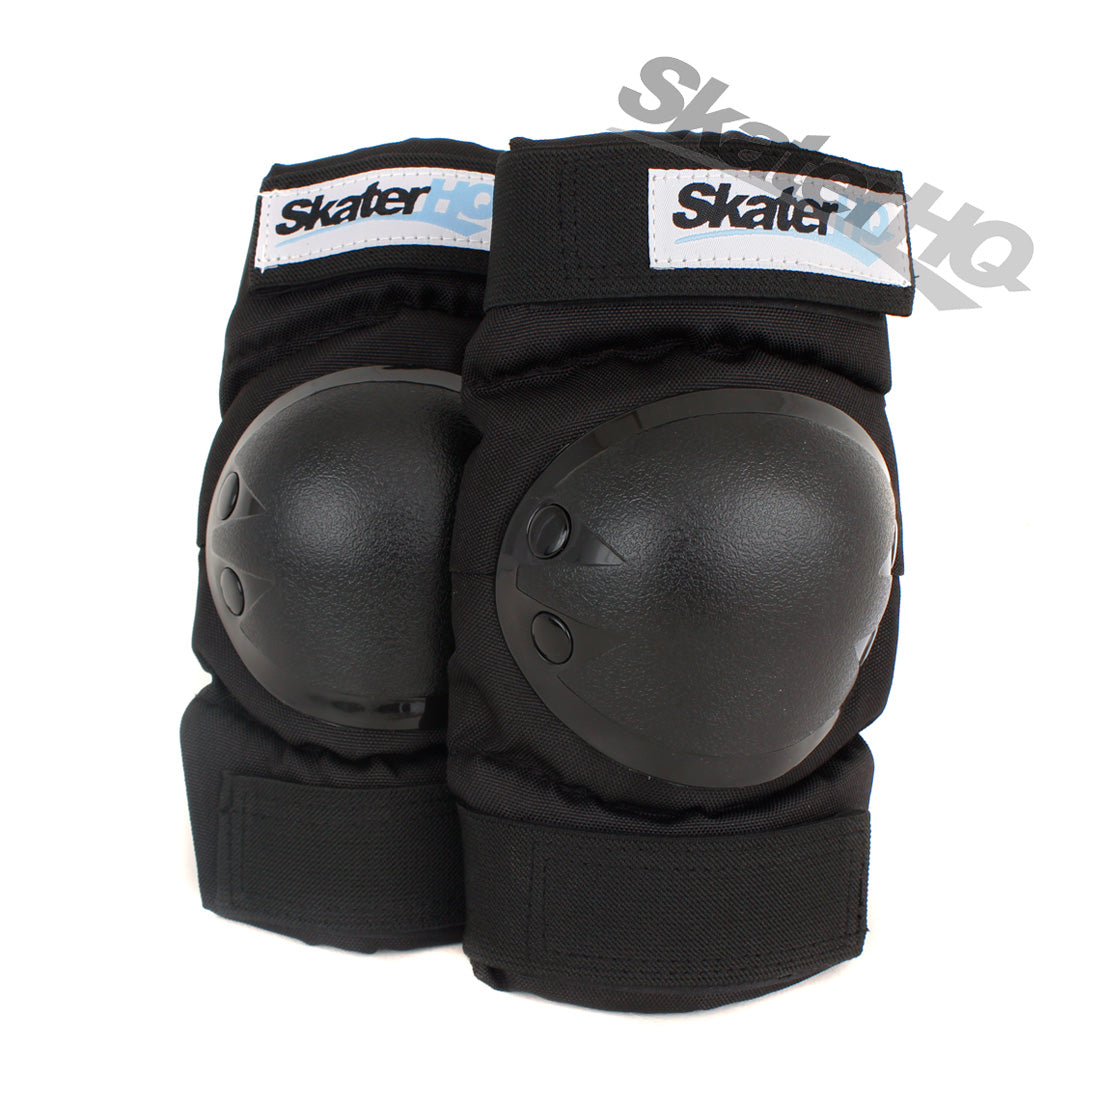 Skater HQ Knee Pads - Small Protective Gear